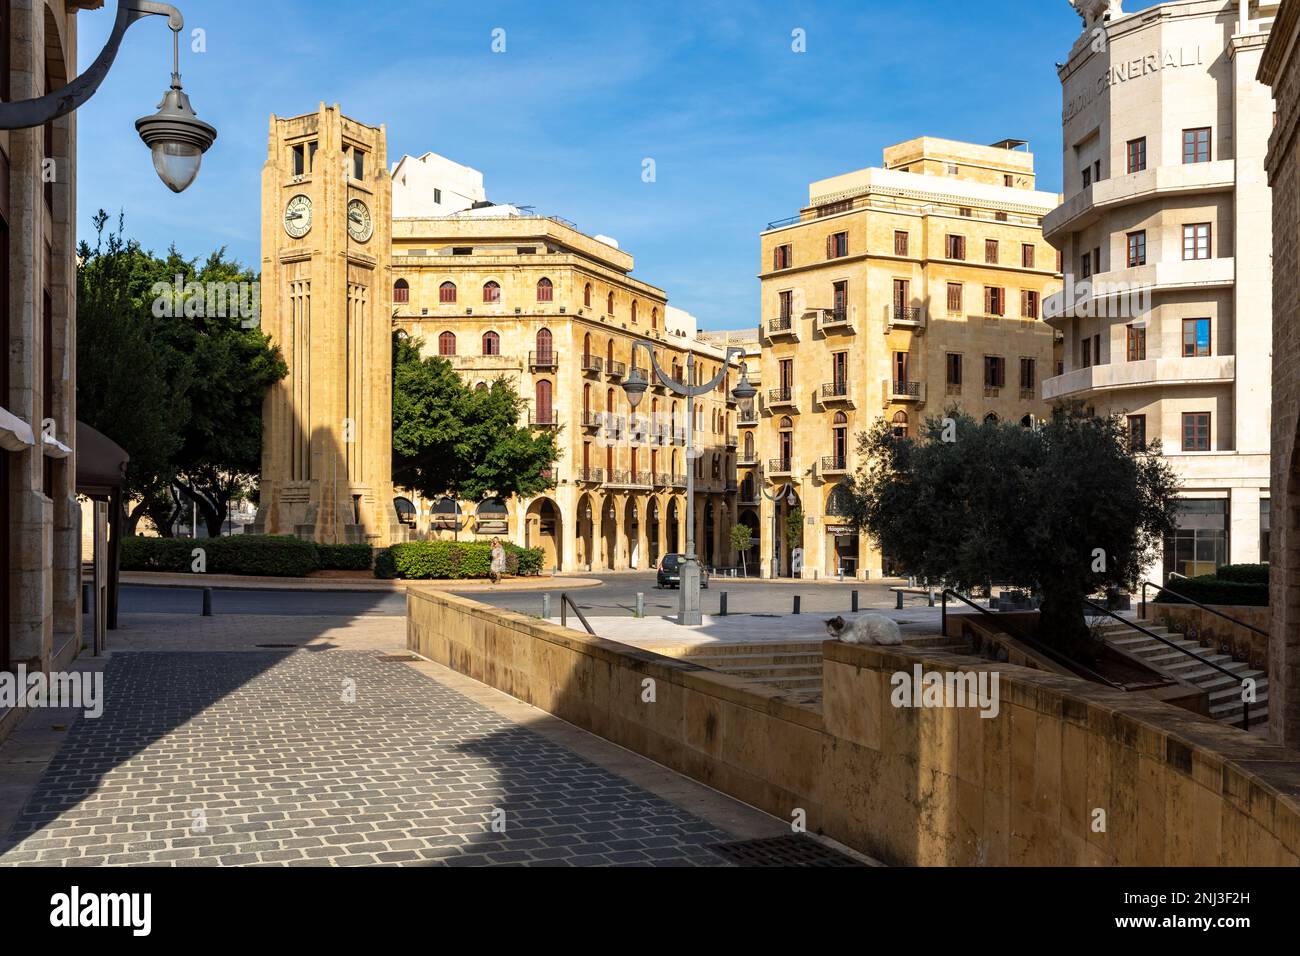 View of Nijmeh Square in Beirut. Traditional architecture in the old town of Beirut. Lebanon. Stock Photo